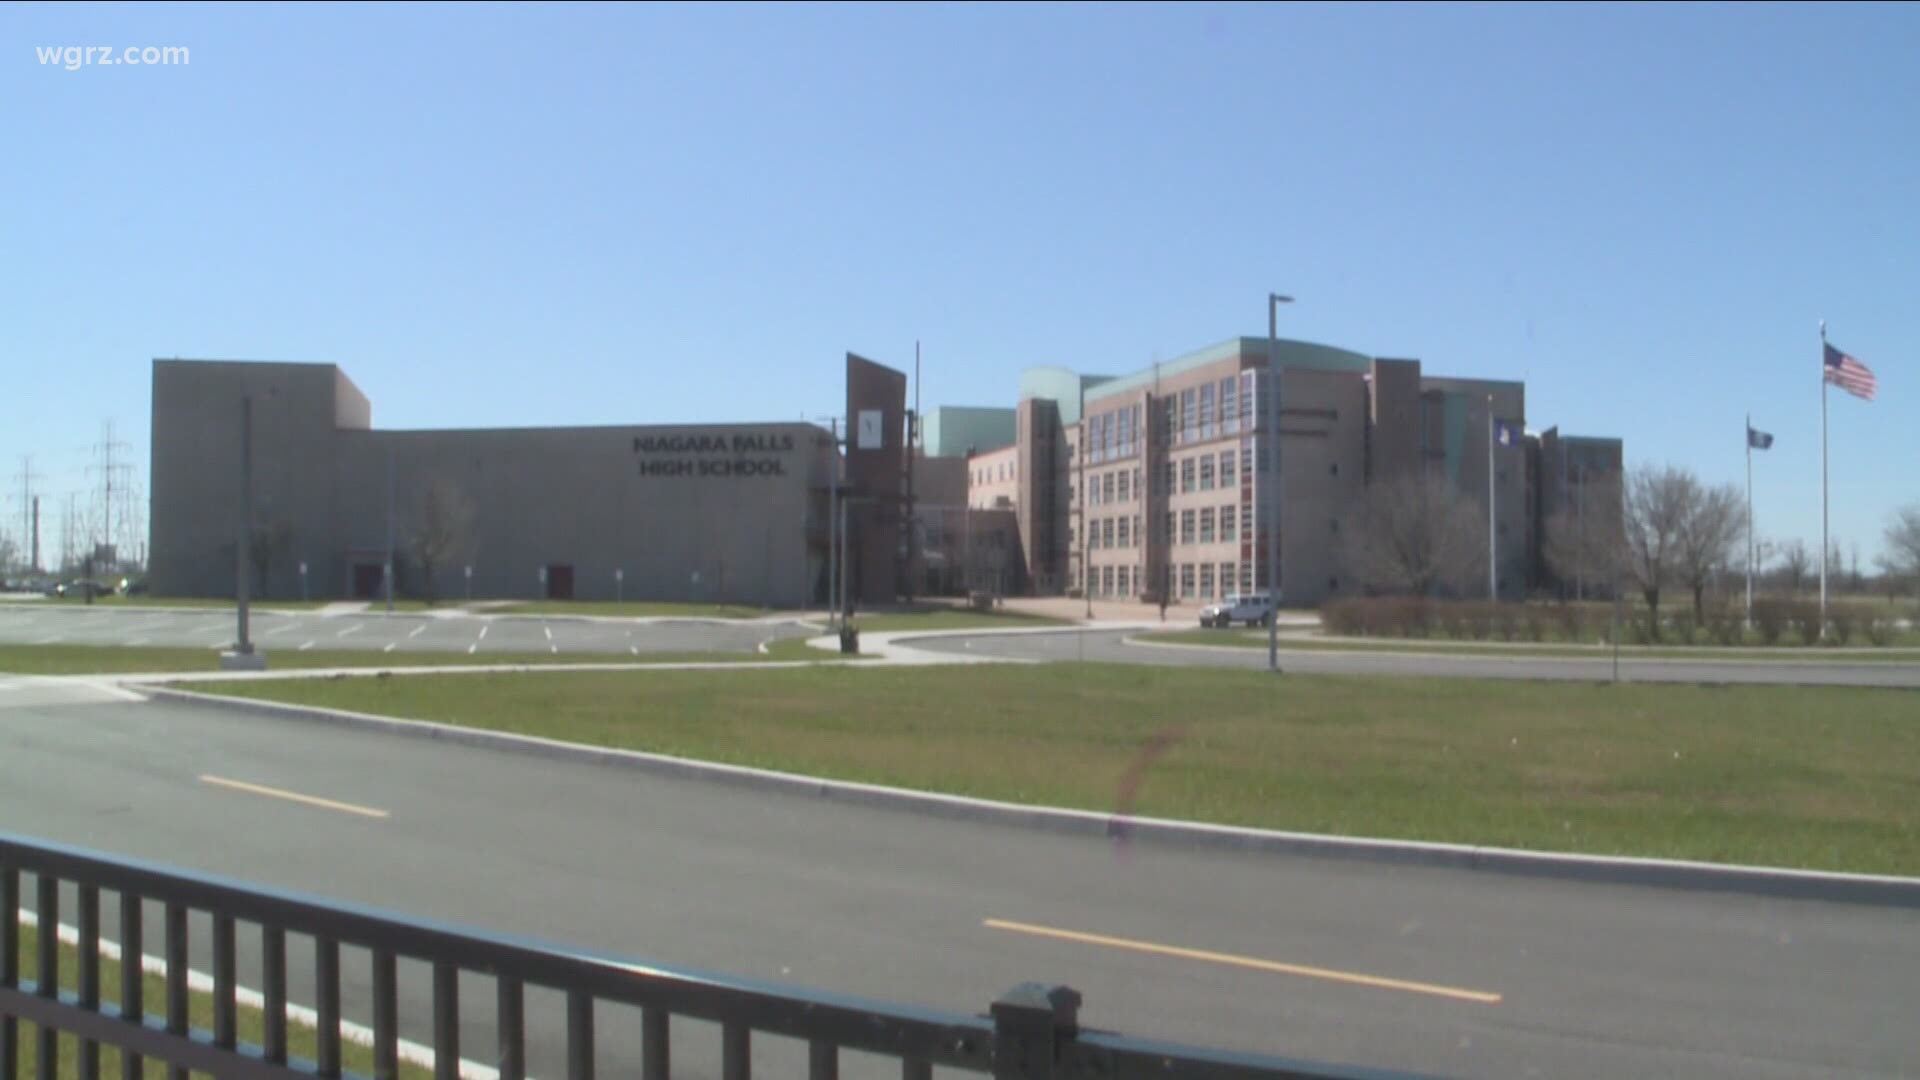 the Falls, the district superintendent there says they have been granted a testing license by the state department of health